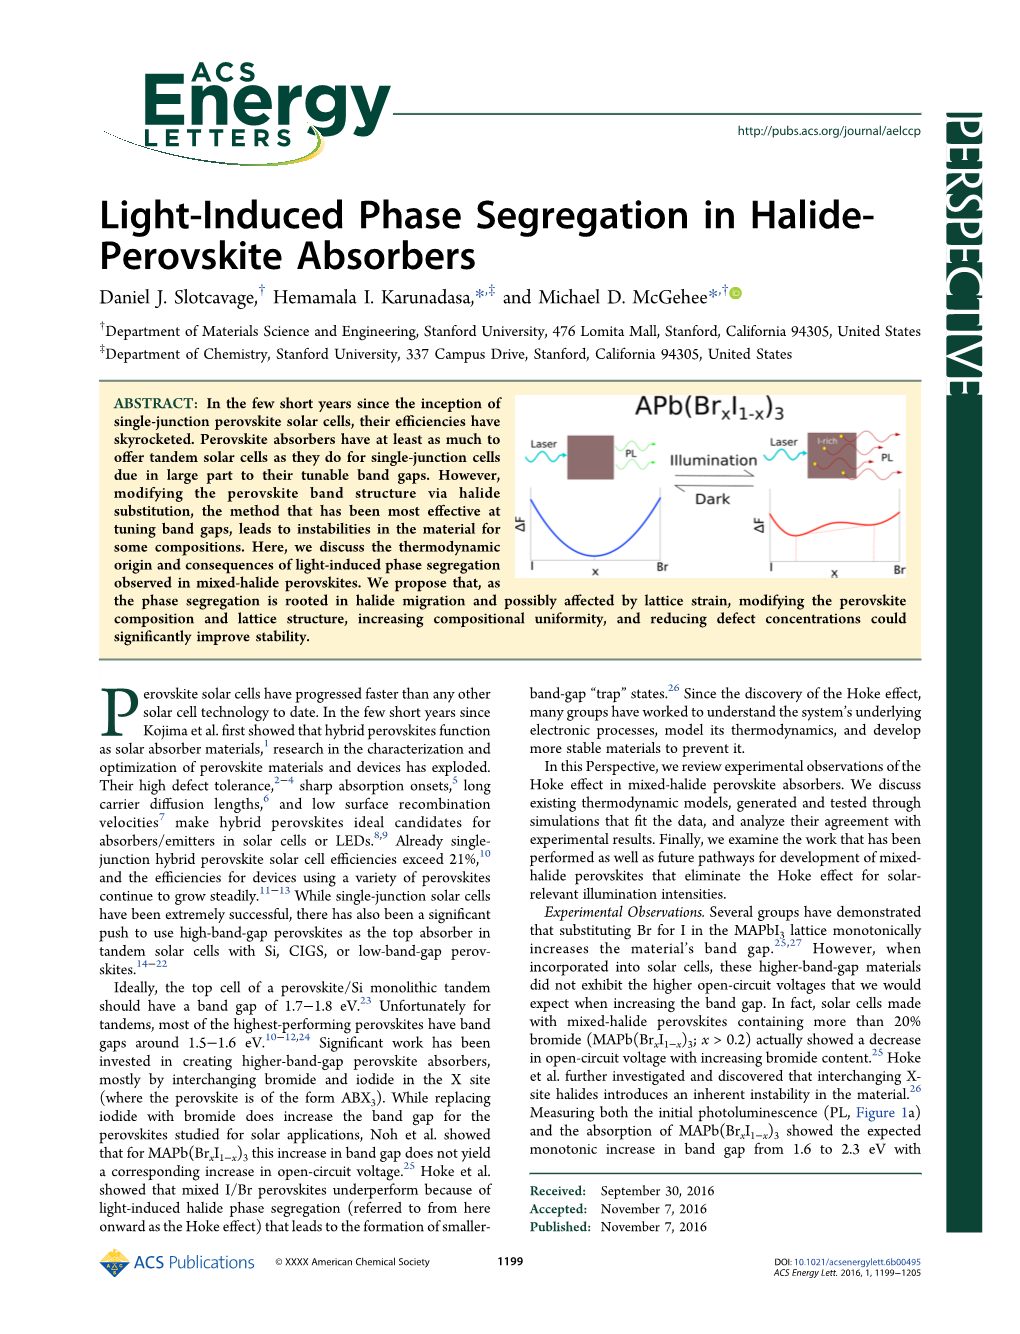 Light-Induced Phase Segregation in Halide-Perovskite Absorbers